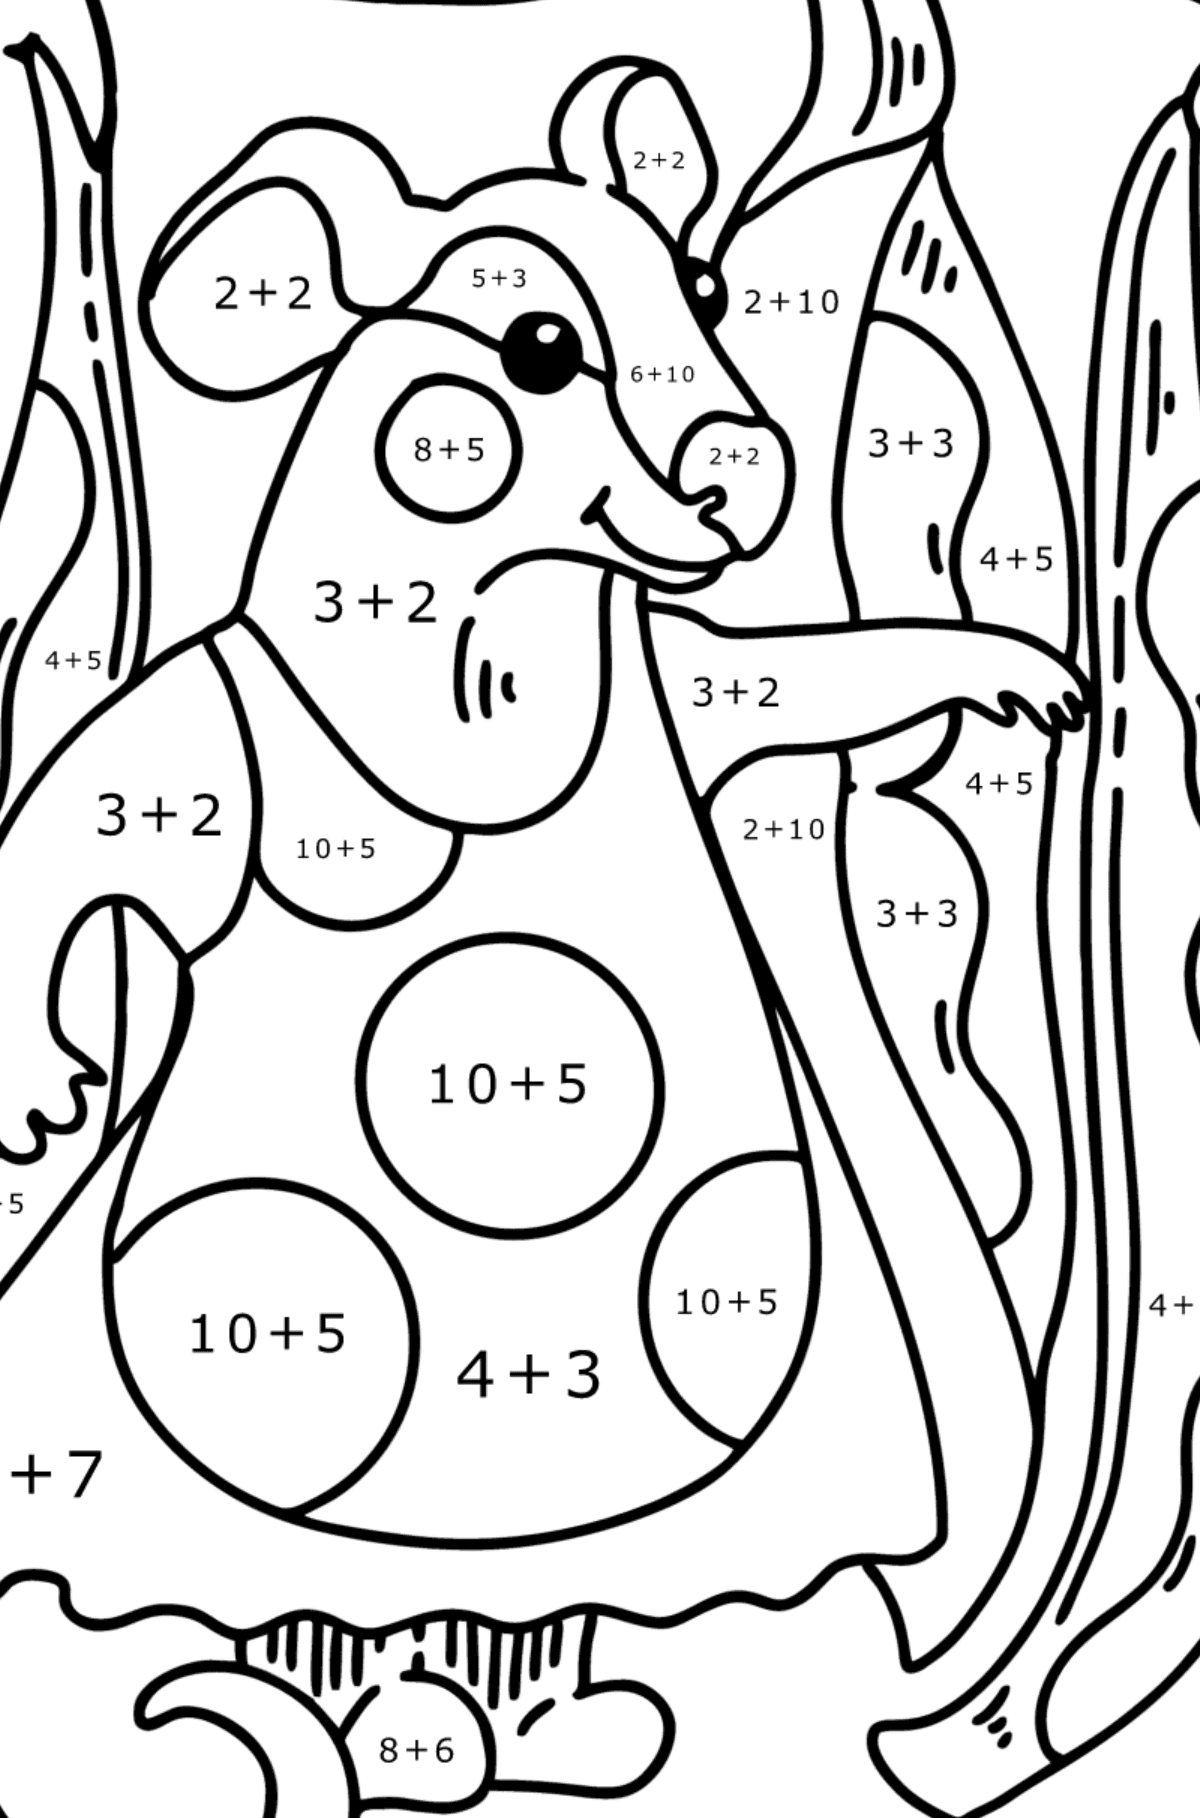 Coloring page - Cute Mouse - Math Coloring - Addition for Kids